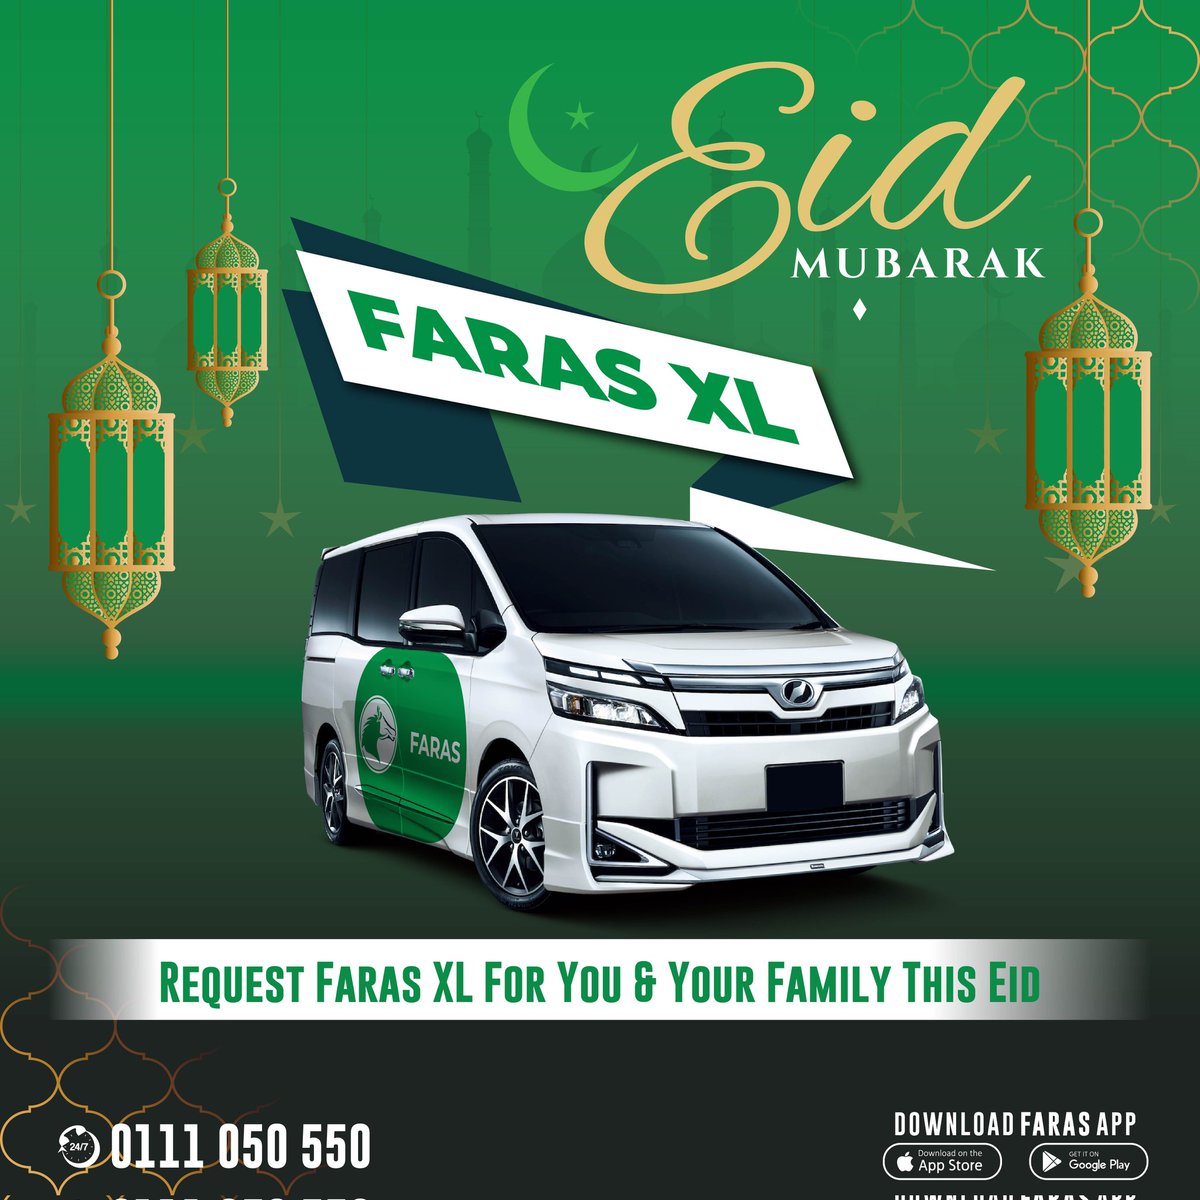 Going out with your loved ones to perform EID prayer? Consider booking Faras XL for a spacious and comfortable ride for up to 7 people. Download the Faras App now faras.link/Faras to get started